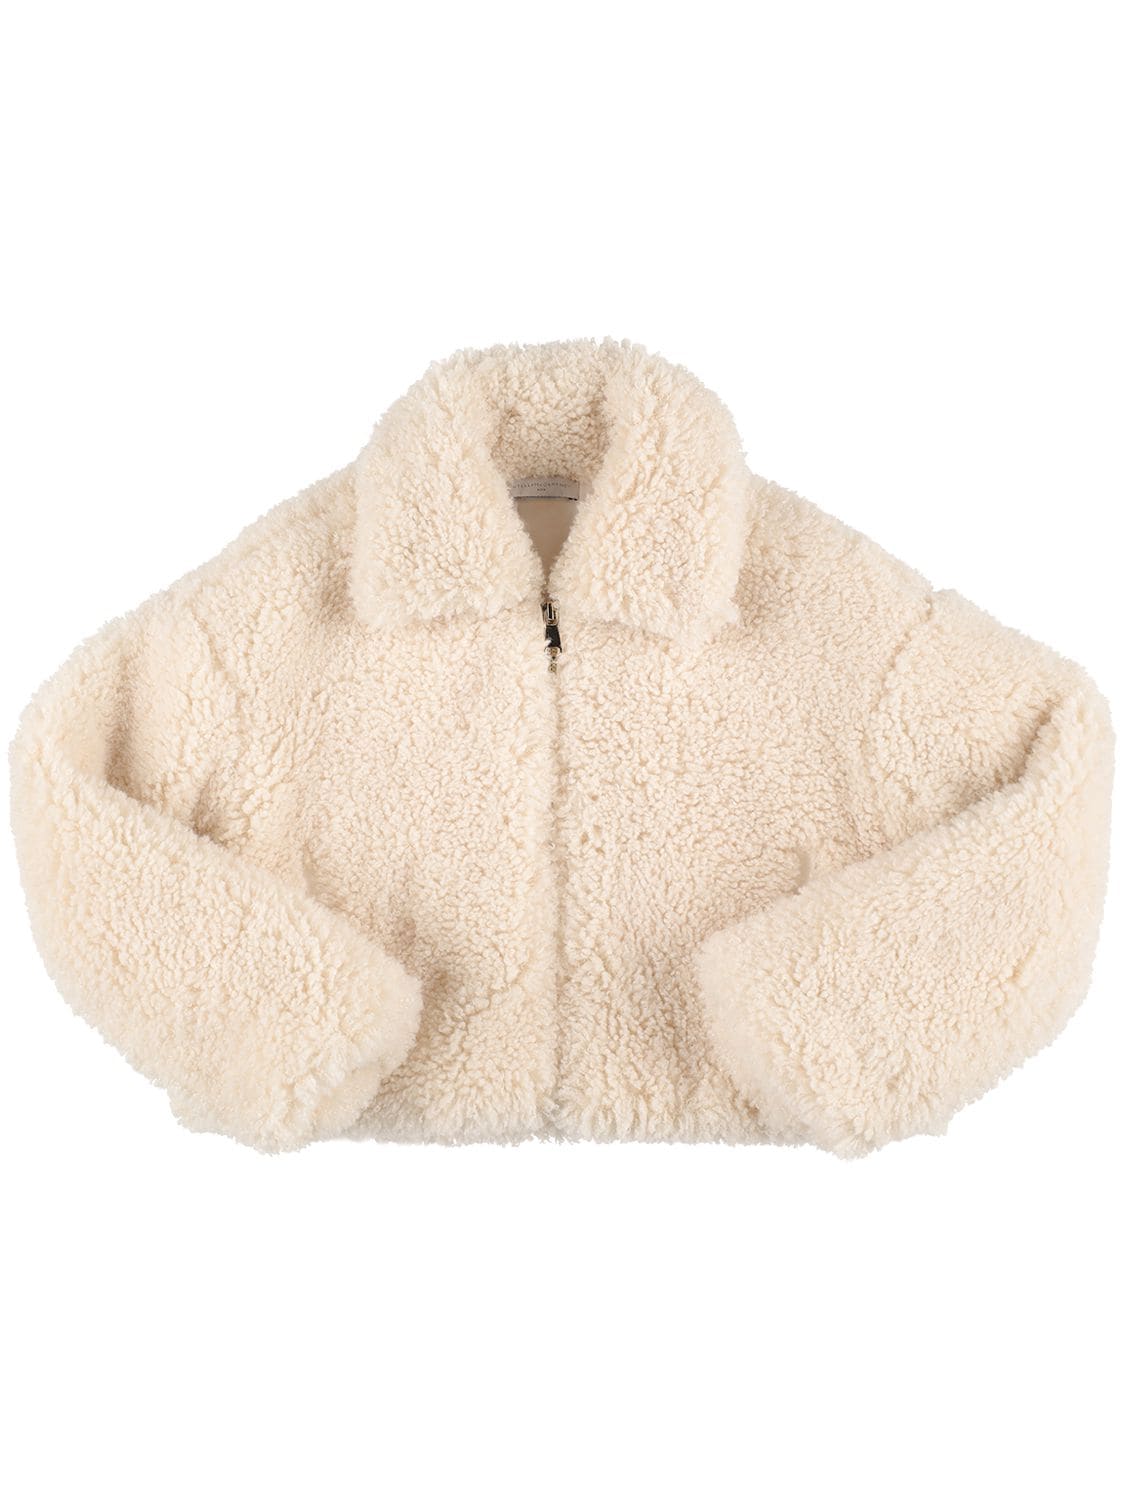 Image of Recycled Faux Fur Jacket